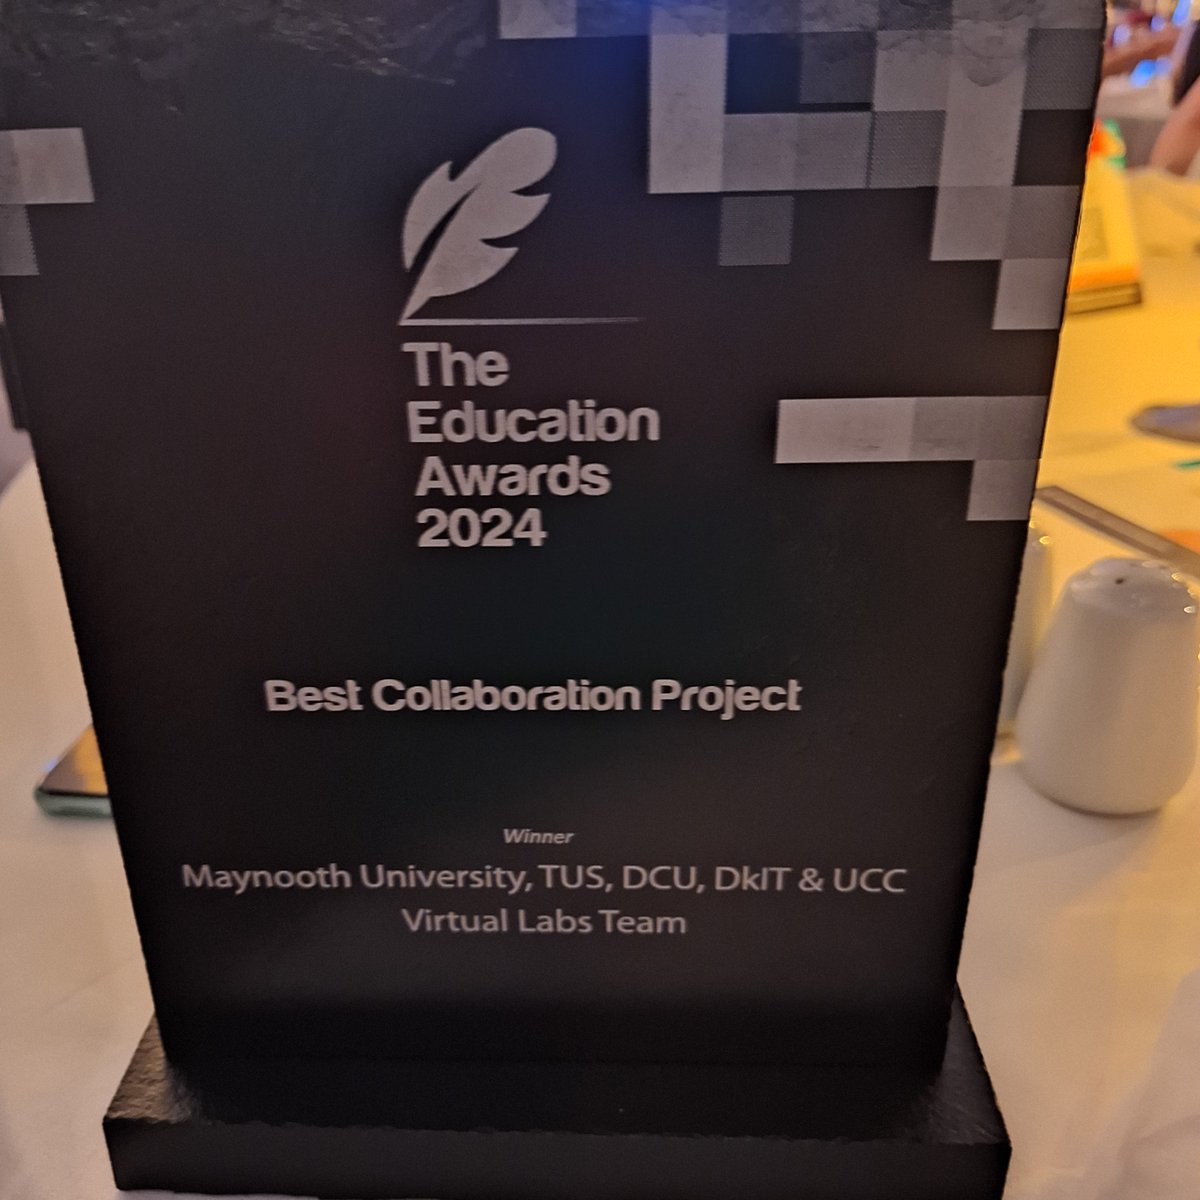 🎉 Great news! 🏆 @virtuallabs has won @EDUAwardsIRL for the Best Collaboration Project. Also in Top 6 for the overall award! The Science Studio @UCC is part of this innovative project. 👏Congratulations to the team including Dr Eric Moore & colleagues in @uccchemistry